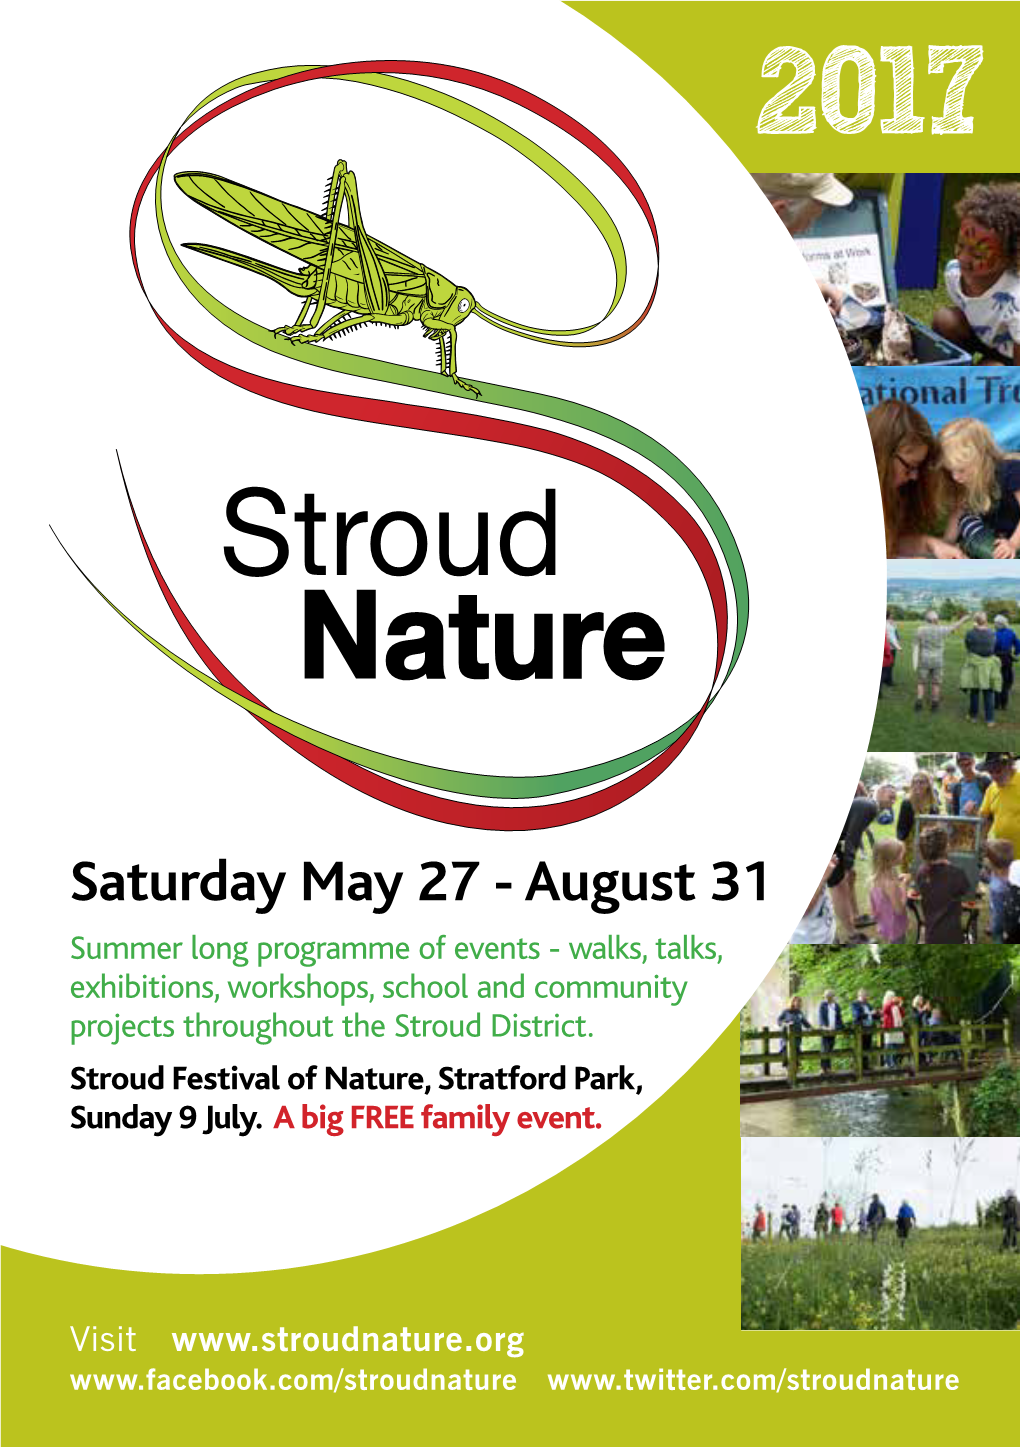 Saturday May 27 - August 31 Summer Long Programme of Events - Walks, Talks, Exhibitions, Workshops, School and Community Projects Throughout the Stroud District